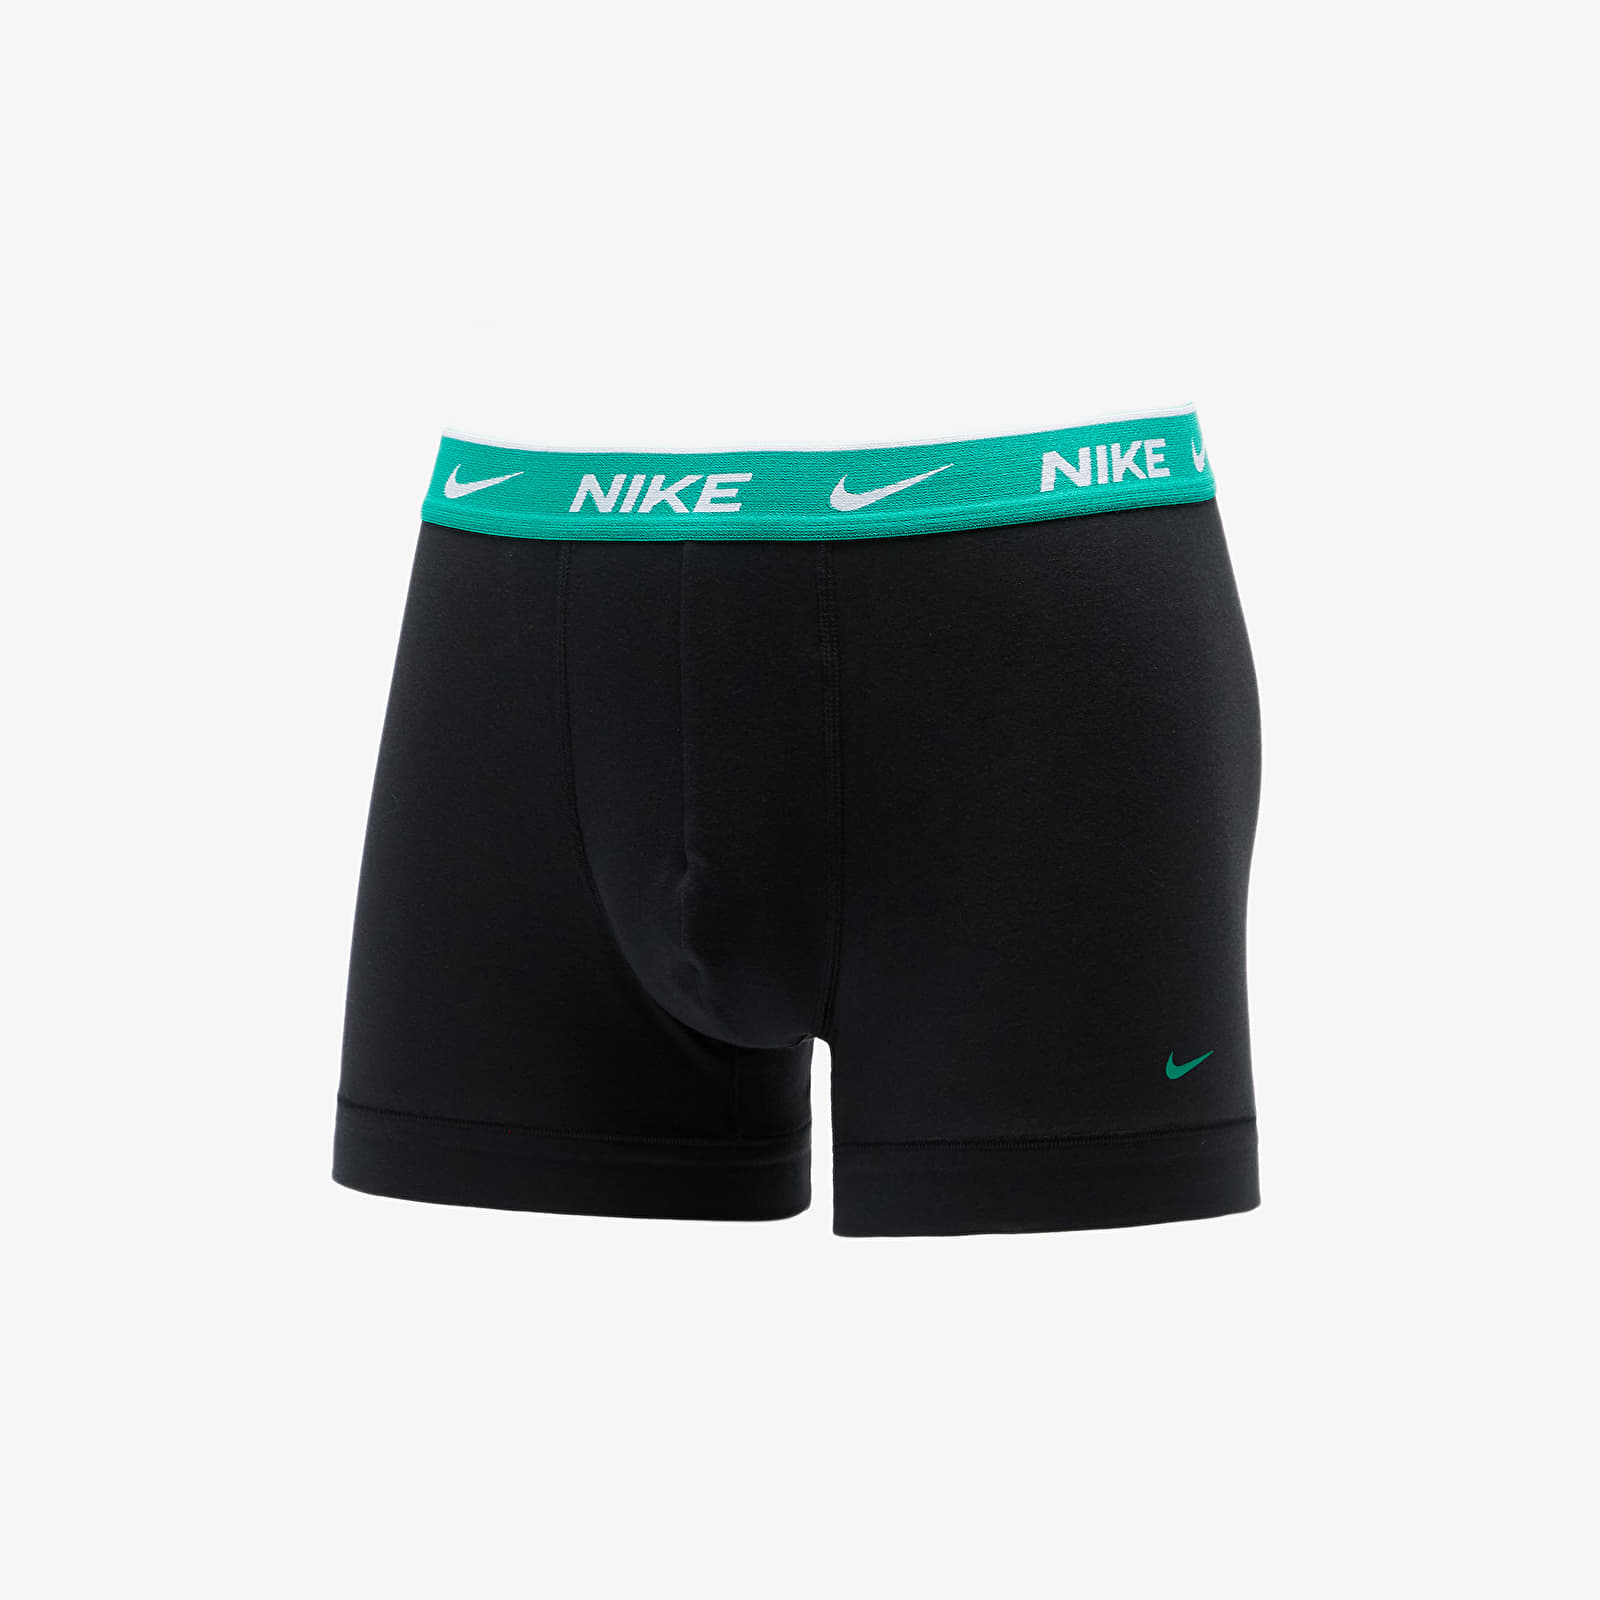 Boxer shorts Nike Dri-FIT Everyday Cotton Stretch Trunk 3-Pack Black